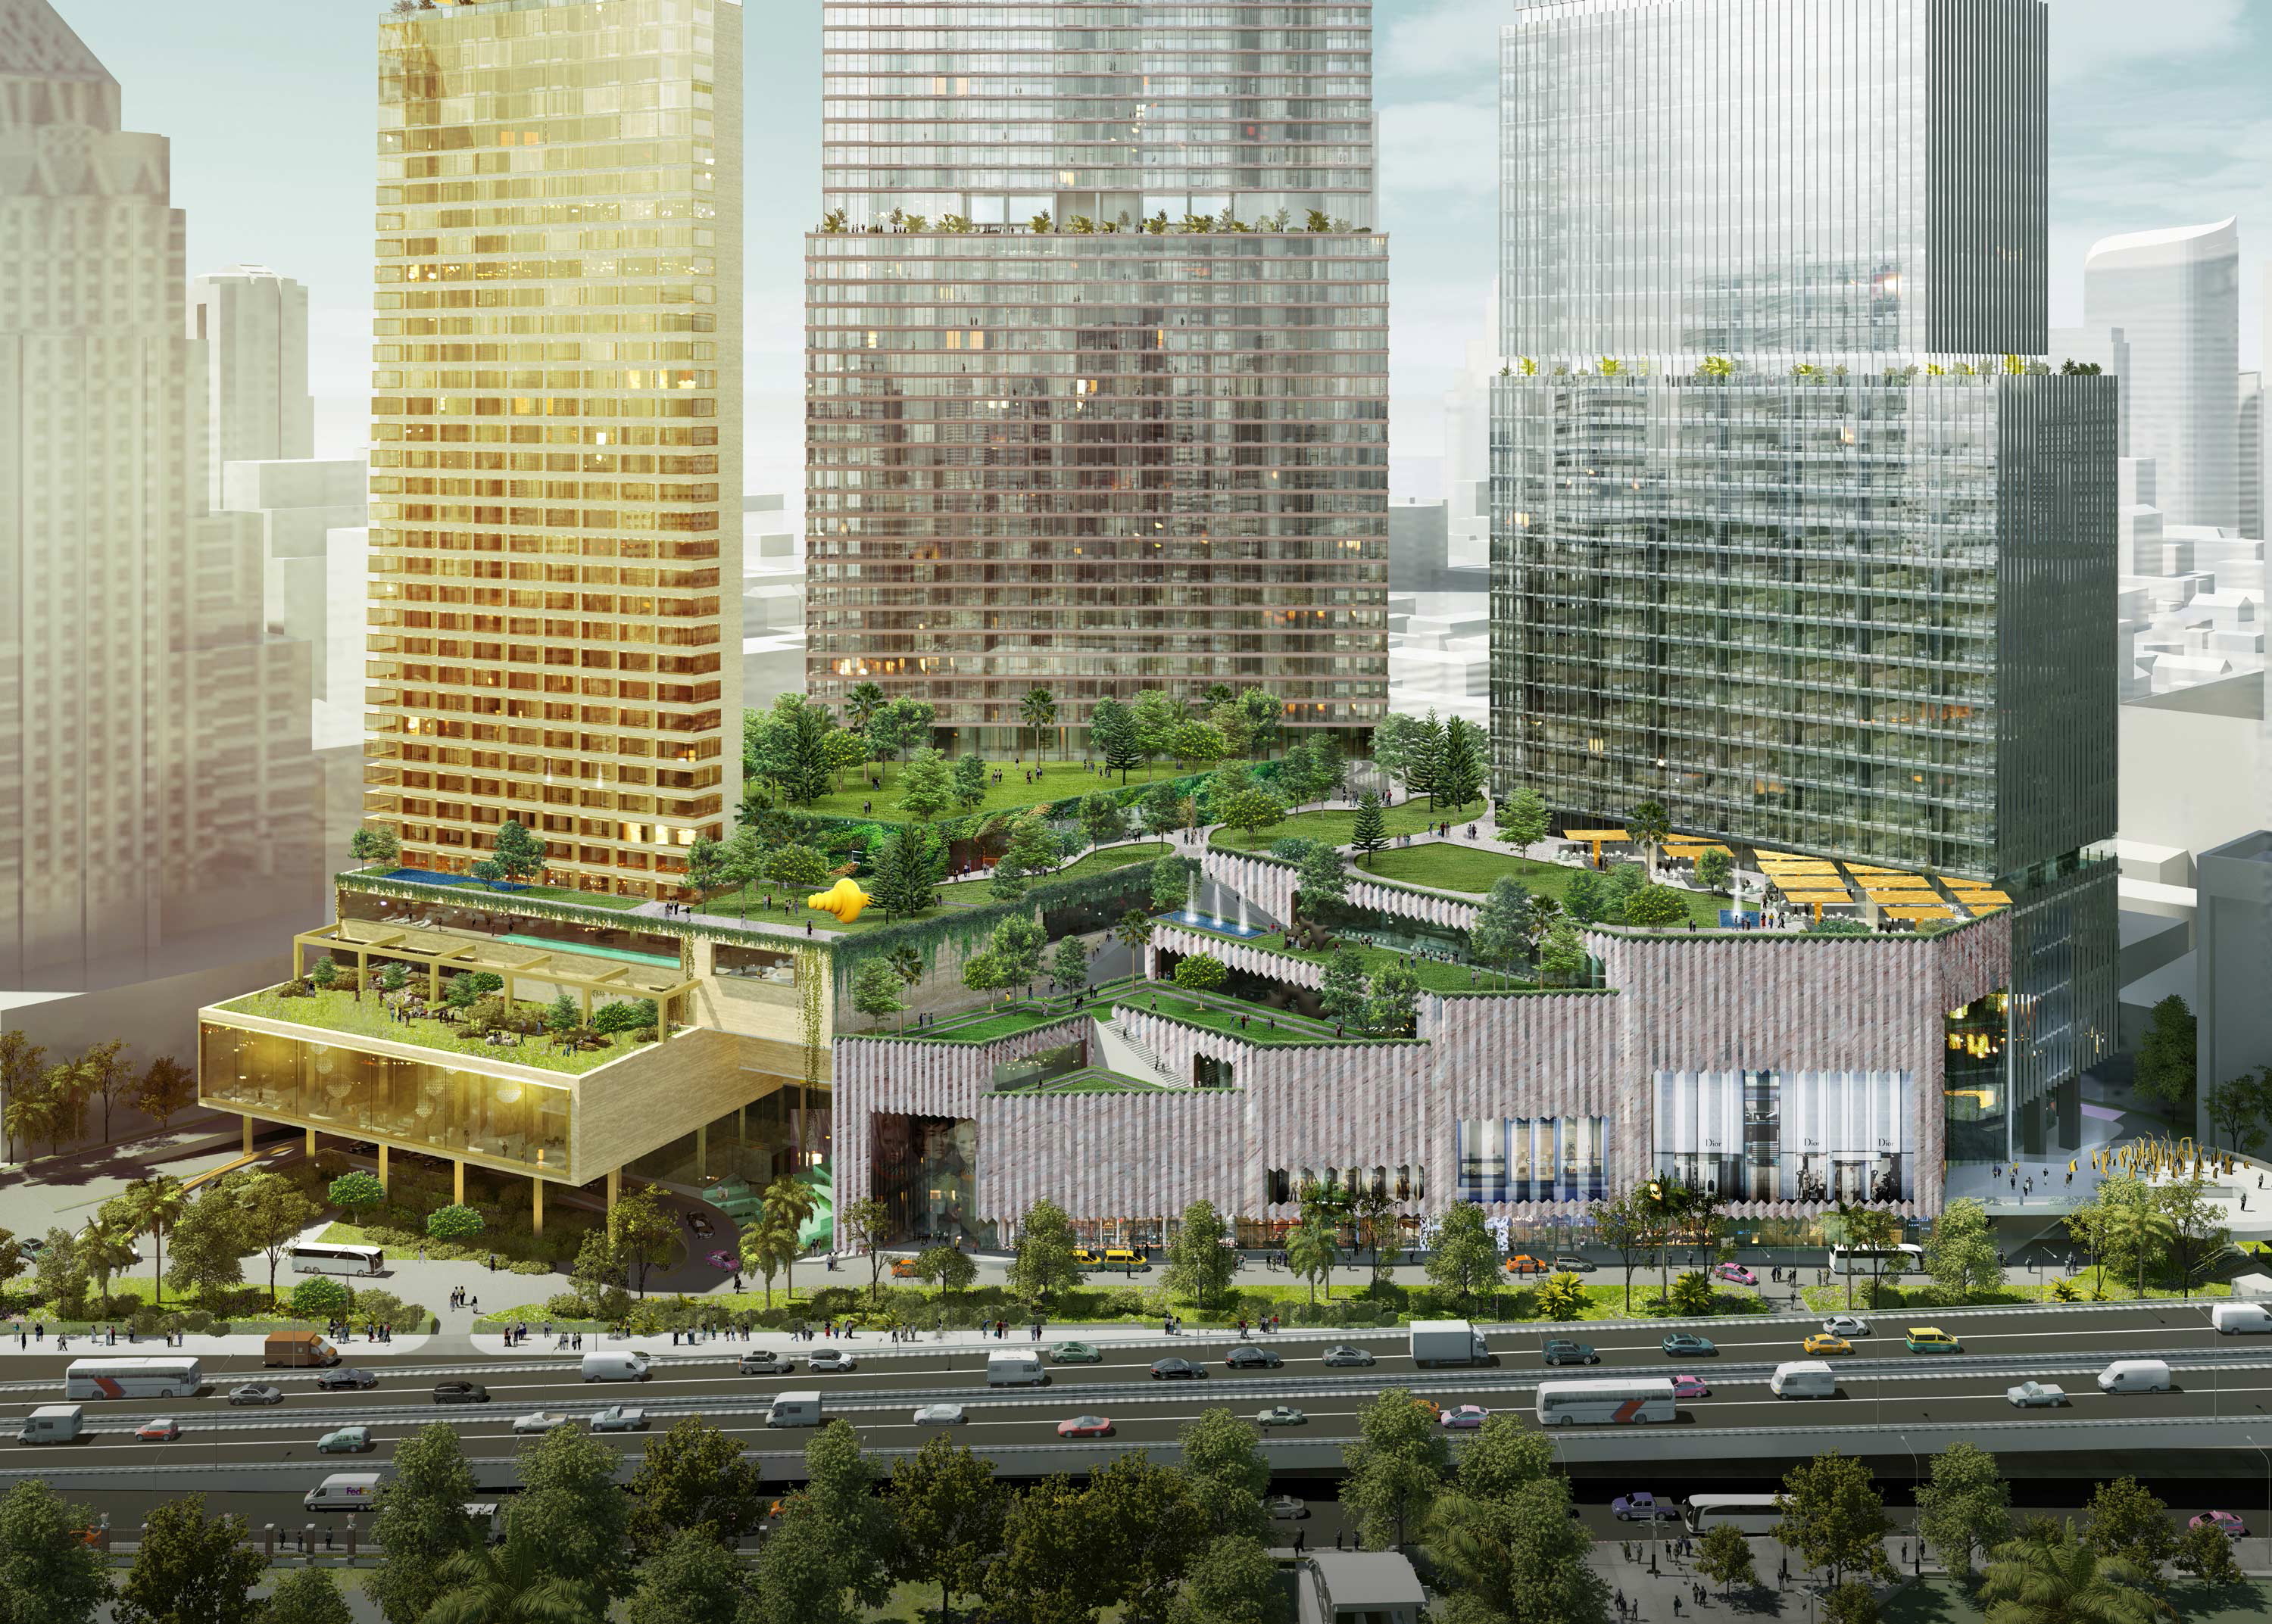 Worth a total of 36.7 billion baht and covering 440,000 sqm of prime real estate on the corner of Silom and Rama IV roads, the project will feature luxury residences, an office tower, a high-end shopping complex with a large rooftop park, and a distinctive reimagining of the Dusit Thani Bangkok hotel, Dusit's iconic flagship property, which served as a symbol of gracious Thai hospitality for 50 years. Click to enlarge.